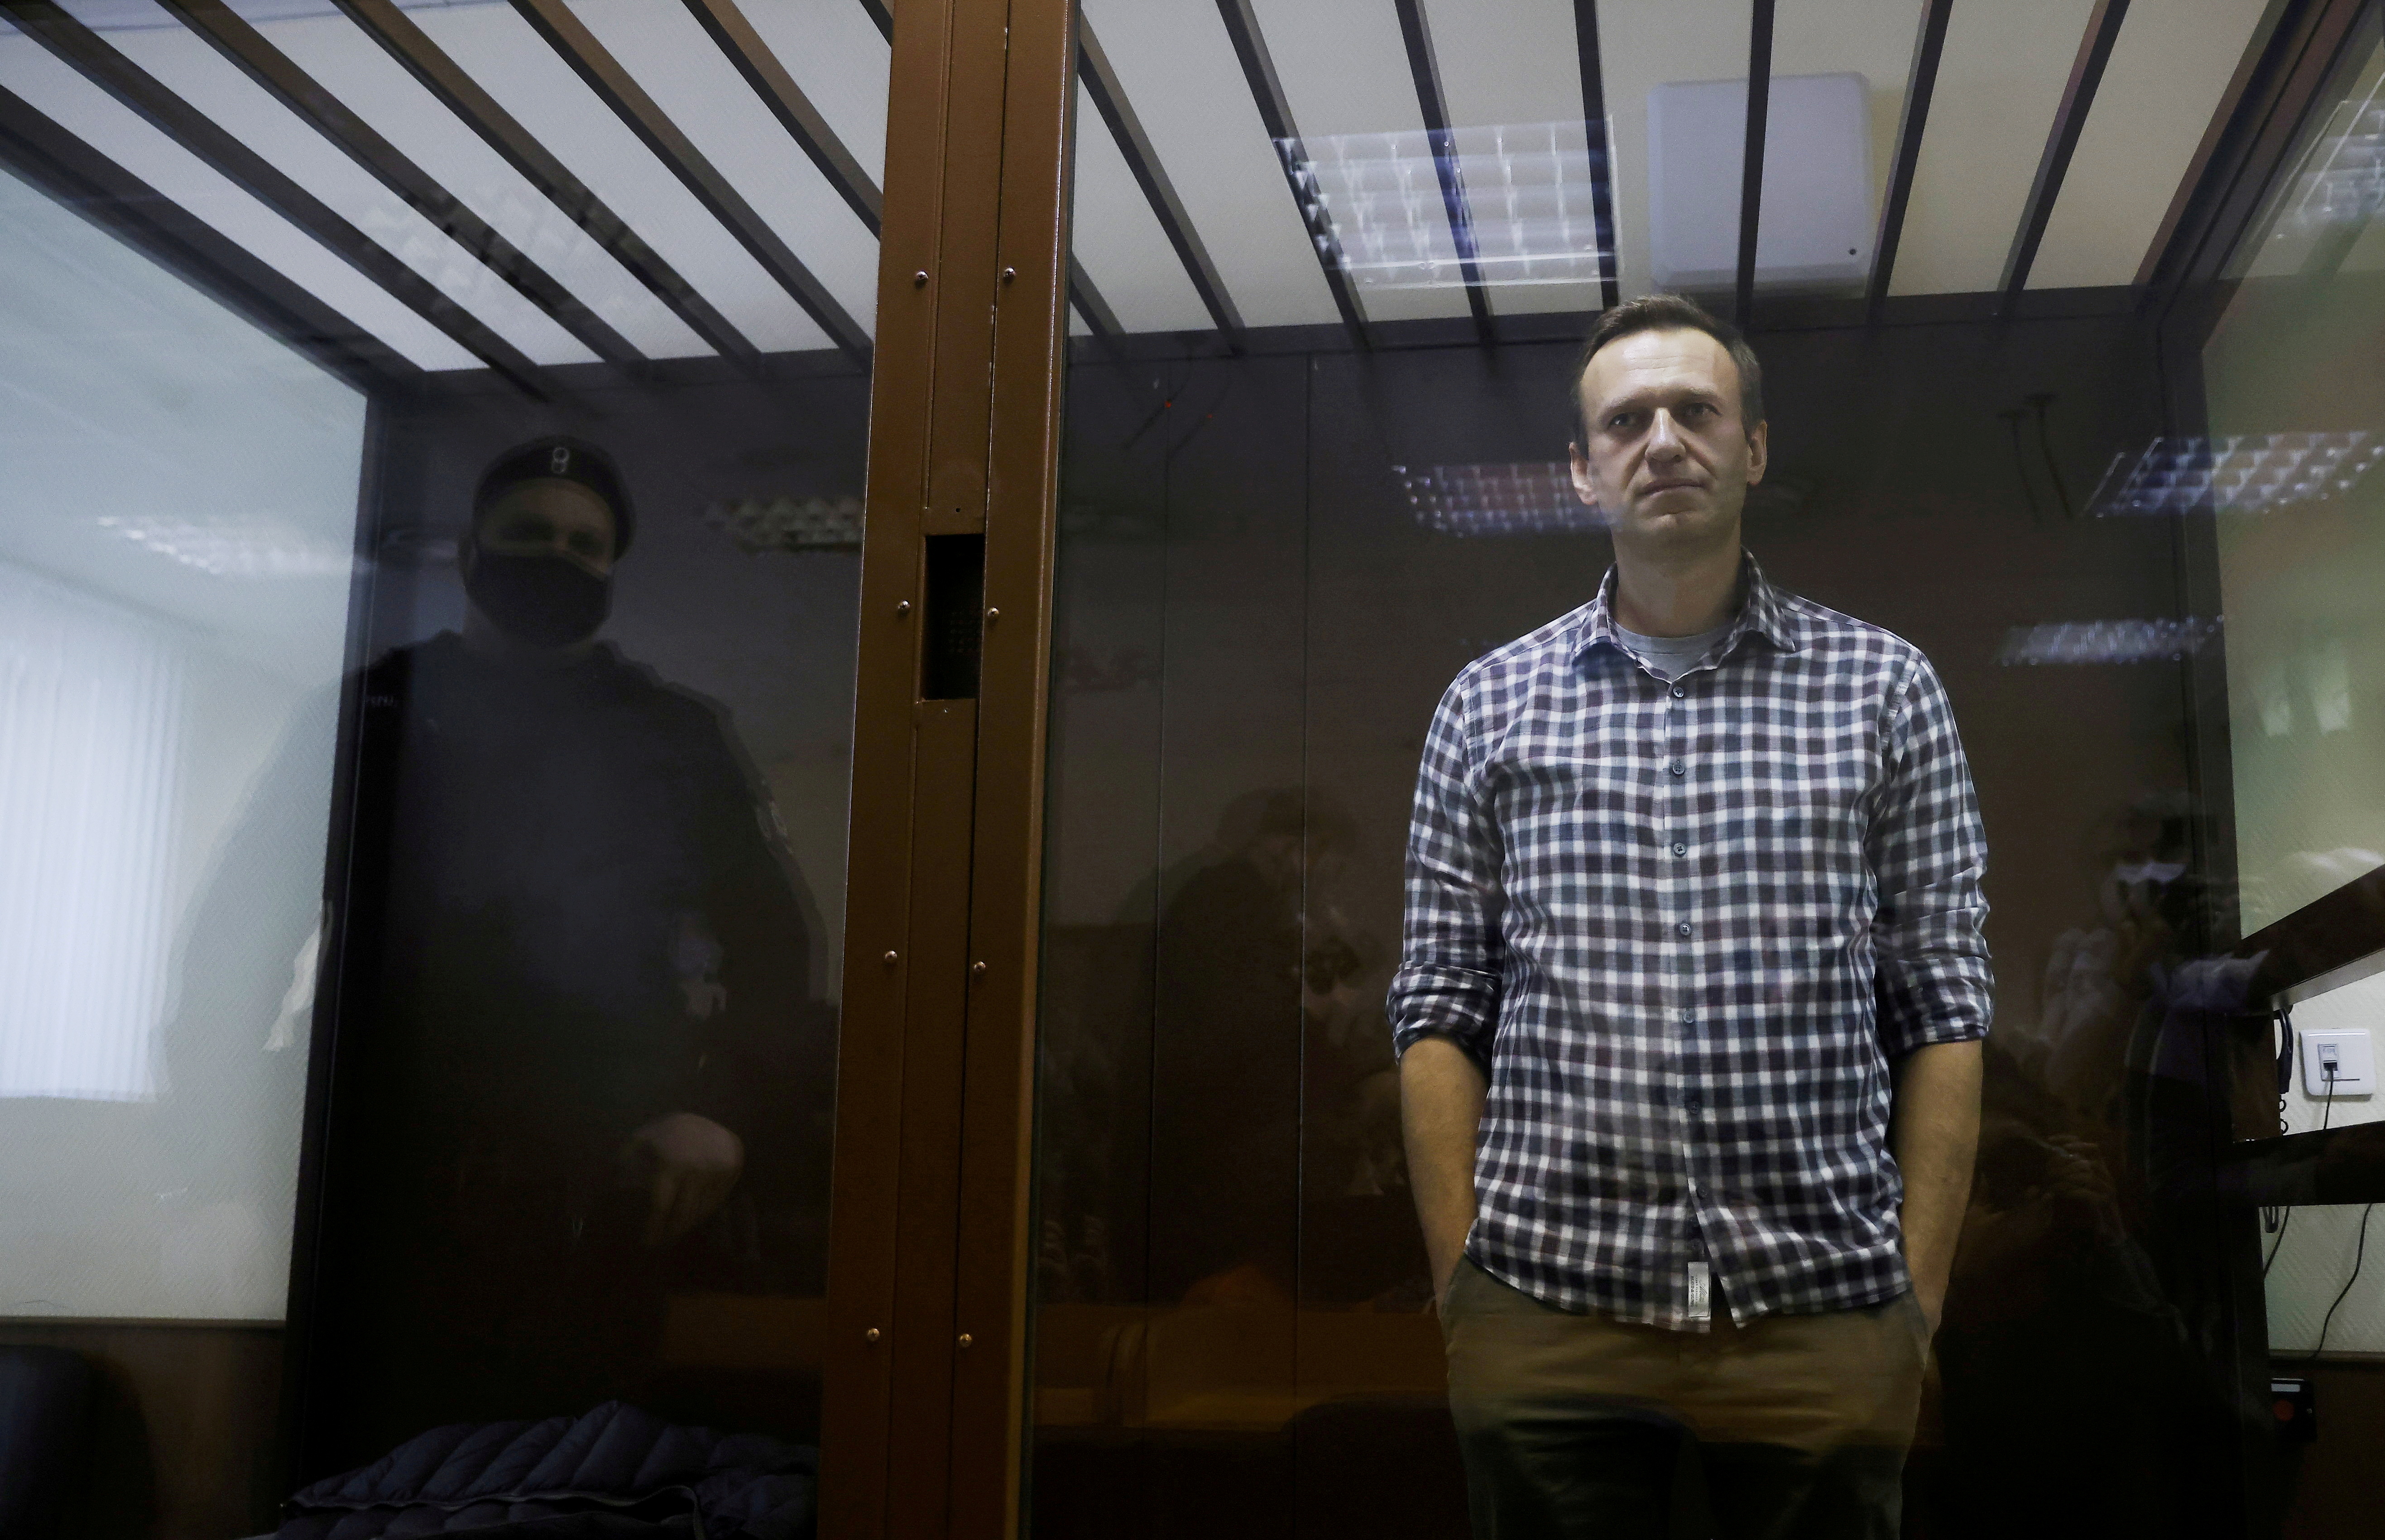 FILE PHOTO: Russian opposition leader Alexei Navalny attends a court hearing in Moscow, Russia February 20, 2021. REUTERS/Maxim Shemetov/File Photo/File Photo